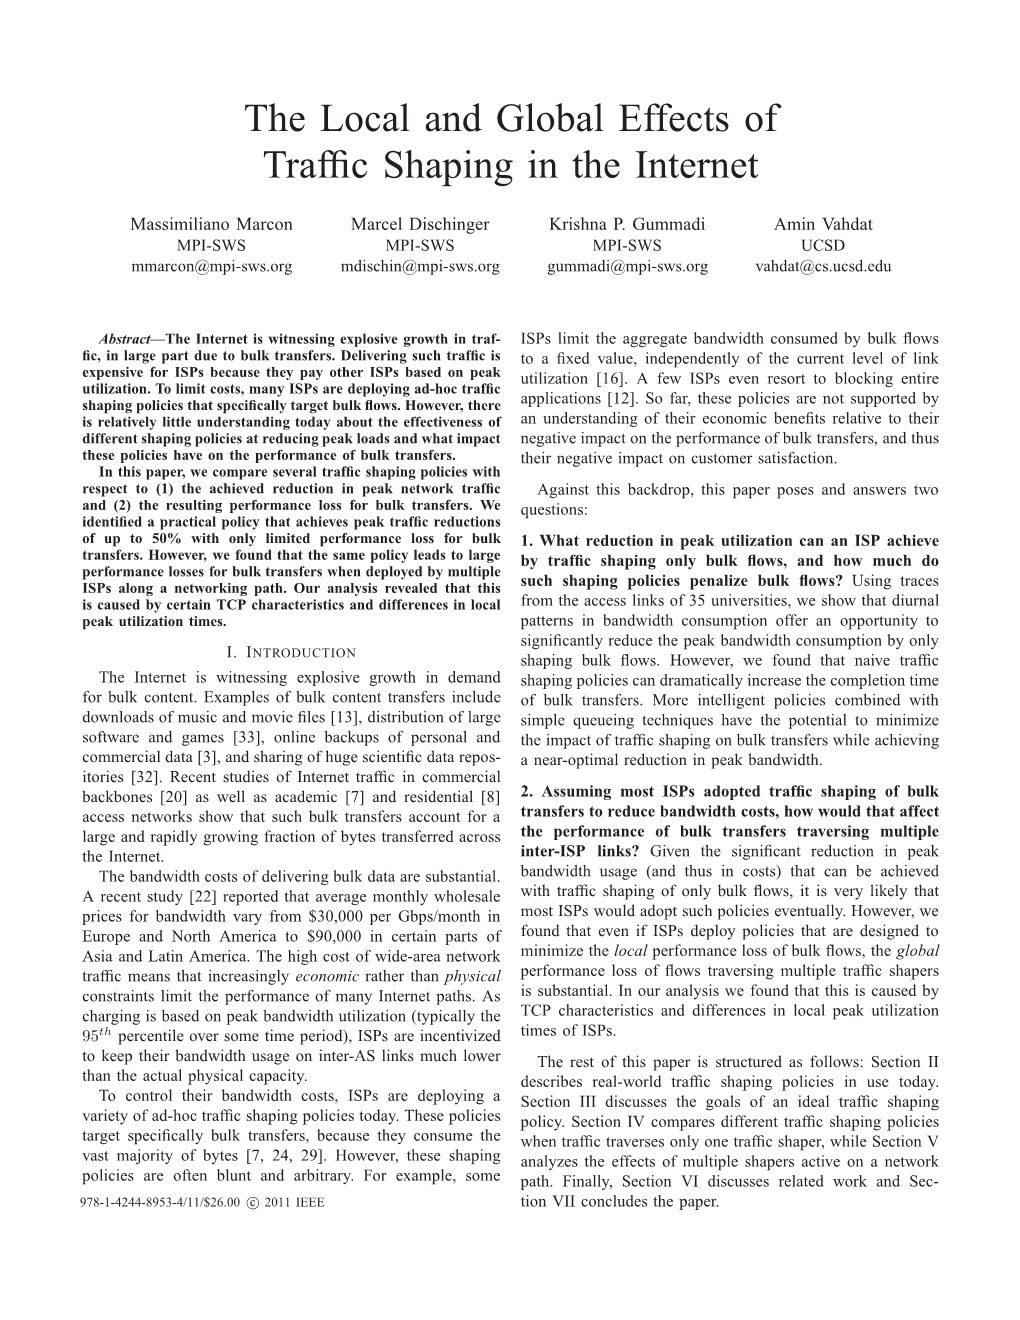 The Local and Global Effects of Traffic Shaping in the Internet